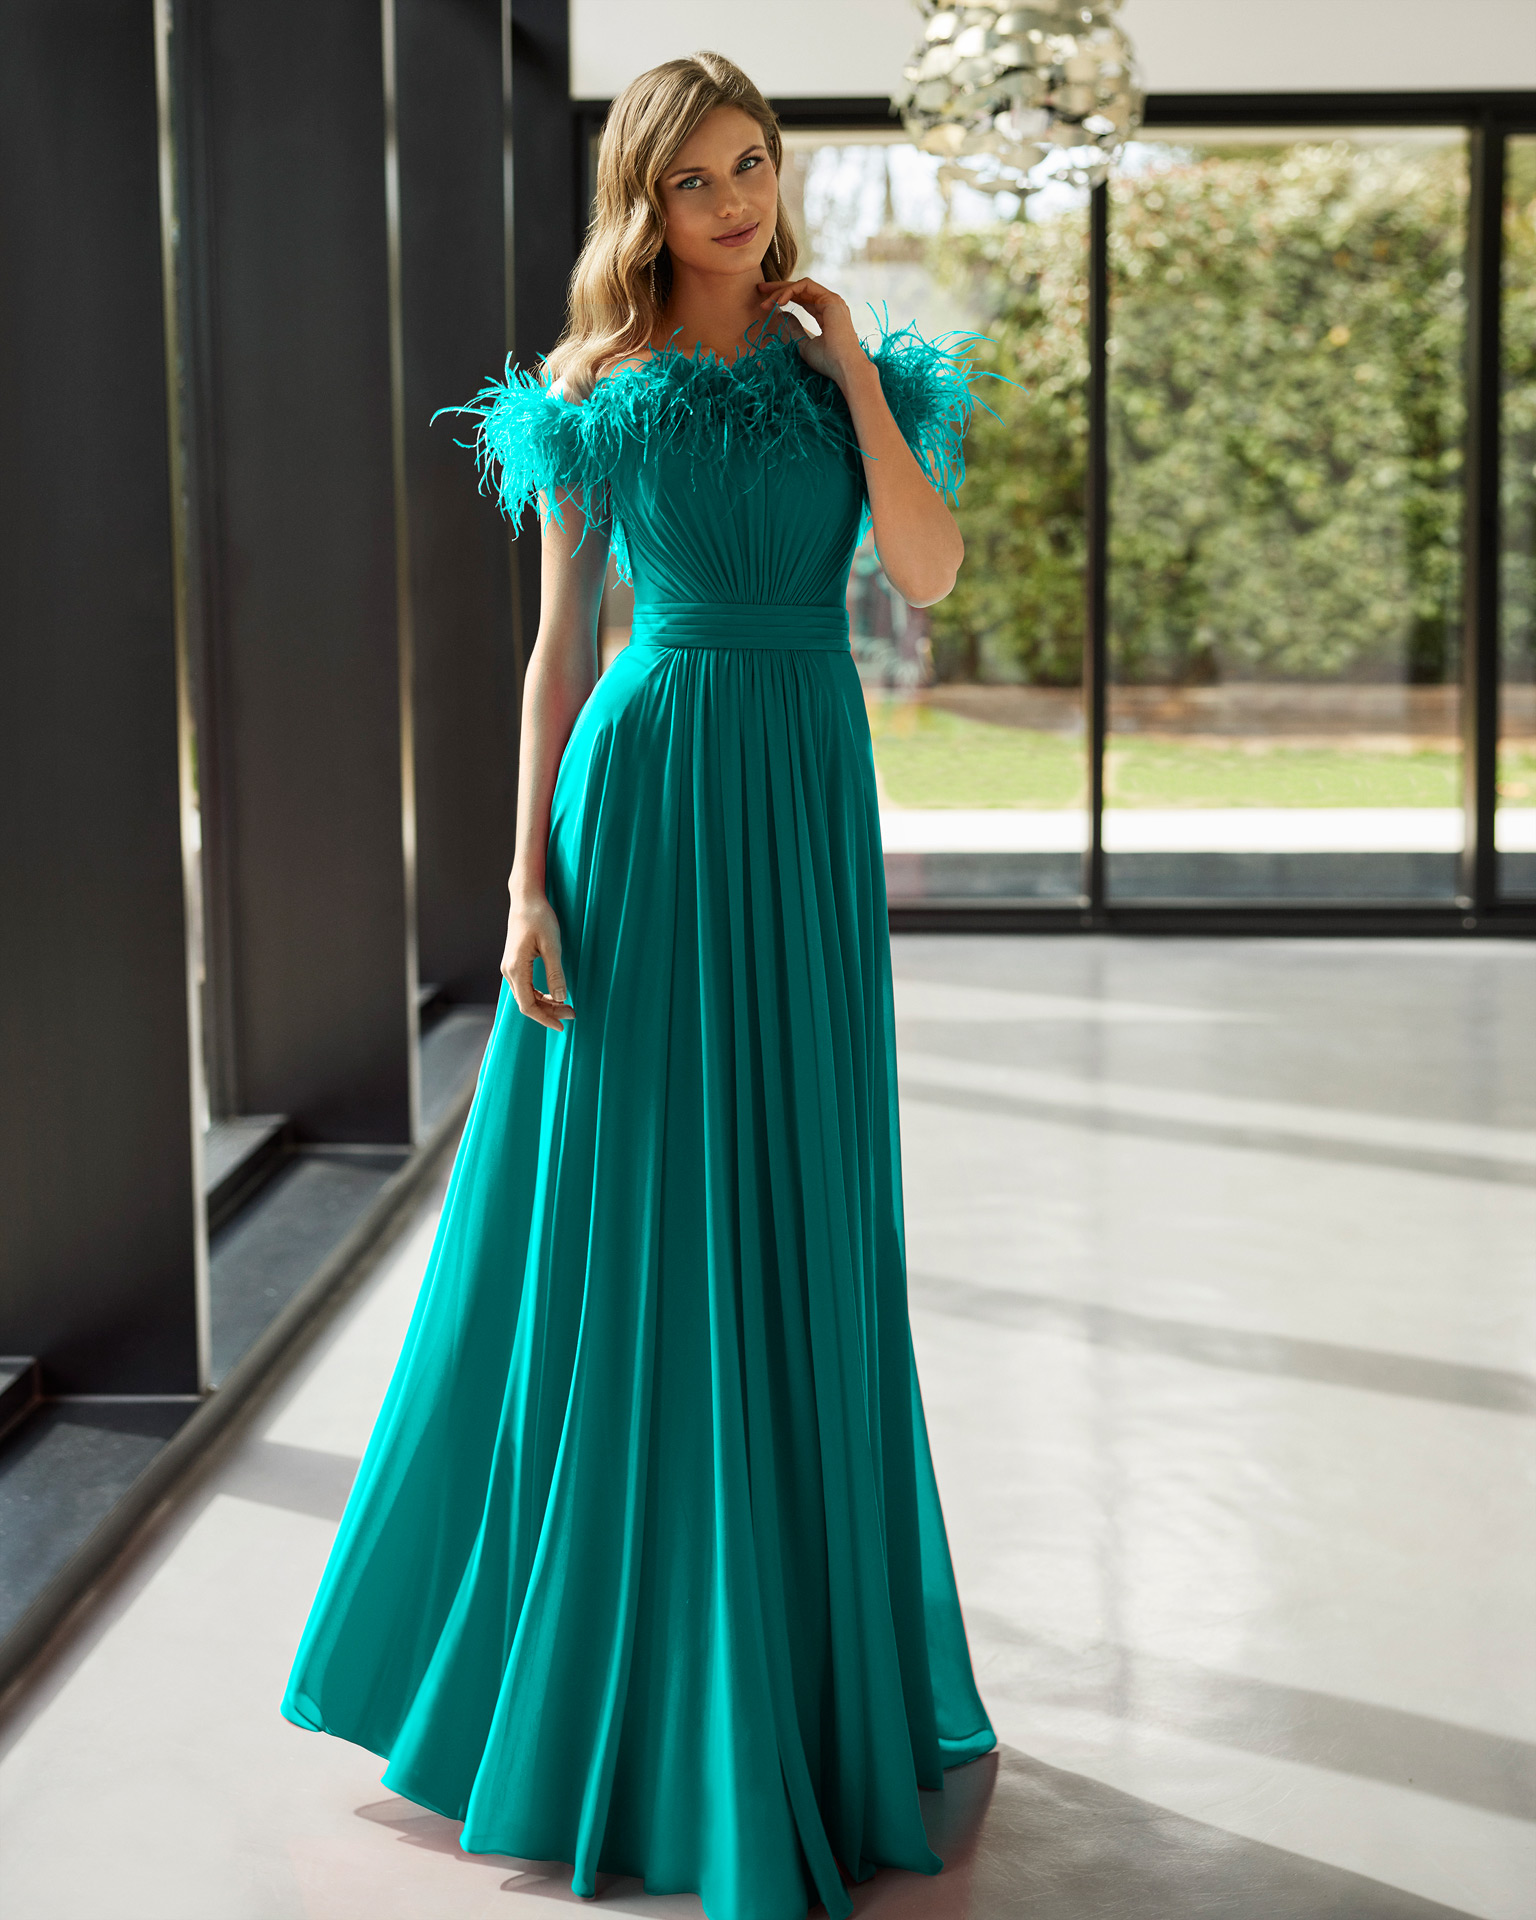 Elegant long cocktail dress. Made in georgette combined with feathers. With off-the-shoulder neckline. Marfil Barcelona on-trend design. MARFIL_BARCELONA.